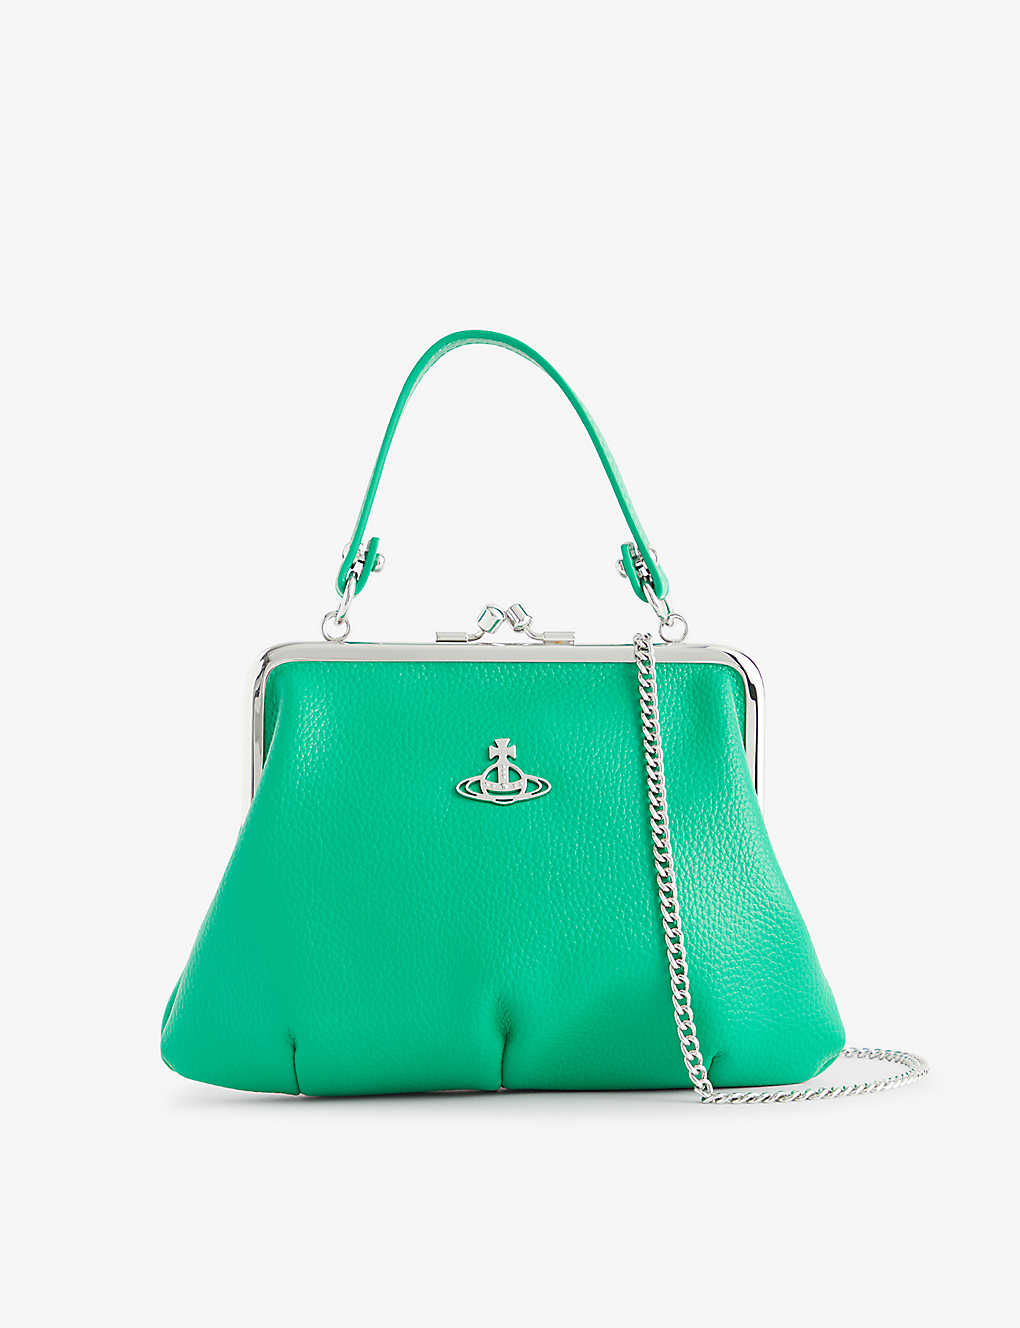 Vivienne Westwood Womens Bright Green Granny Frame Faux-leather Top-handle Bag